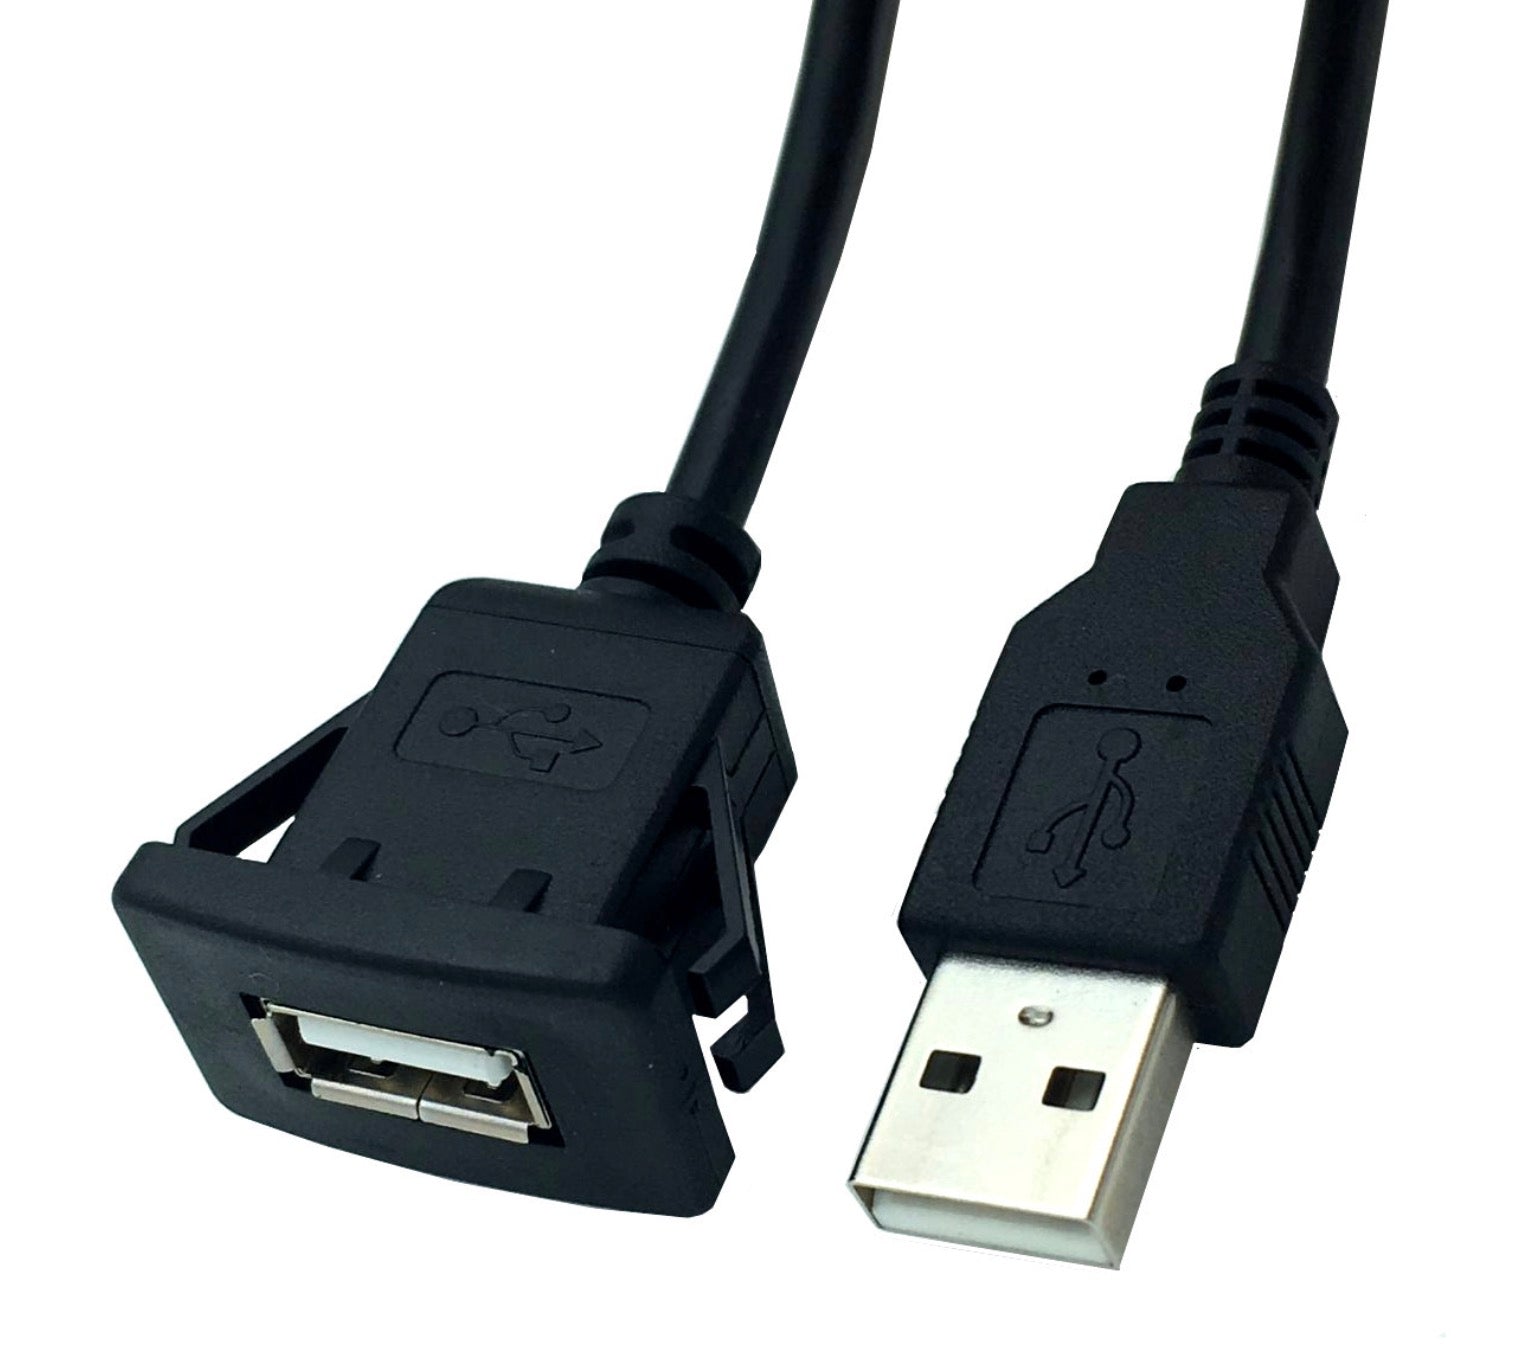 USB 2.0 Type A Male to Female Dash Mount Cable